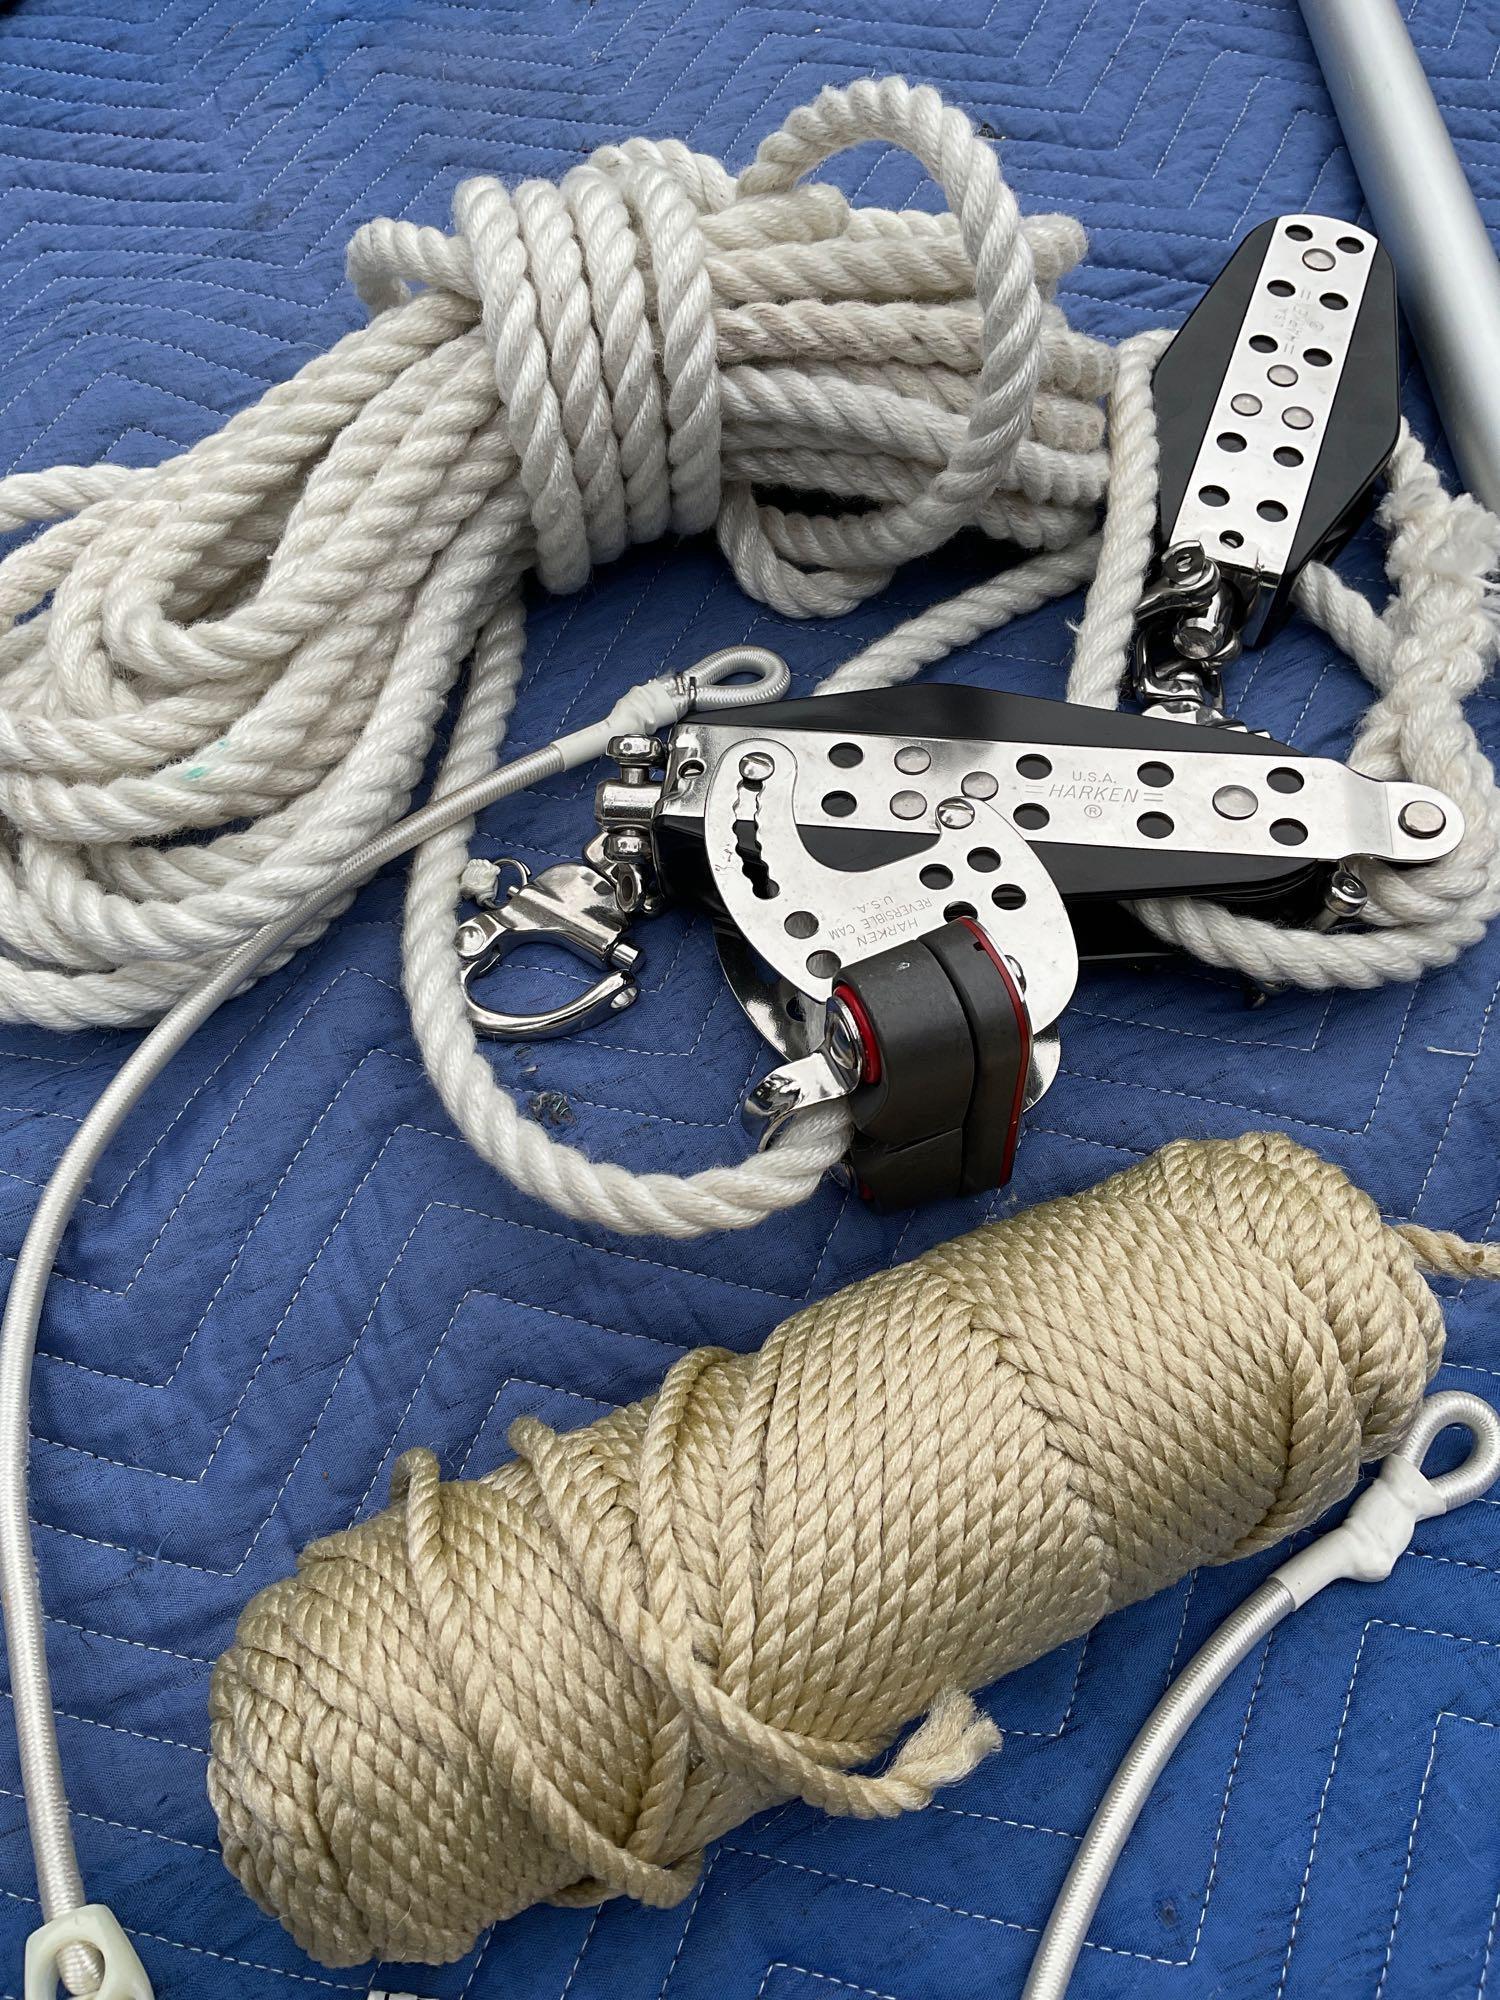 Boat accessories. Nailer boat hook, REI & Wichard harnesses, USA Harken pullies with rope, etc